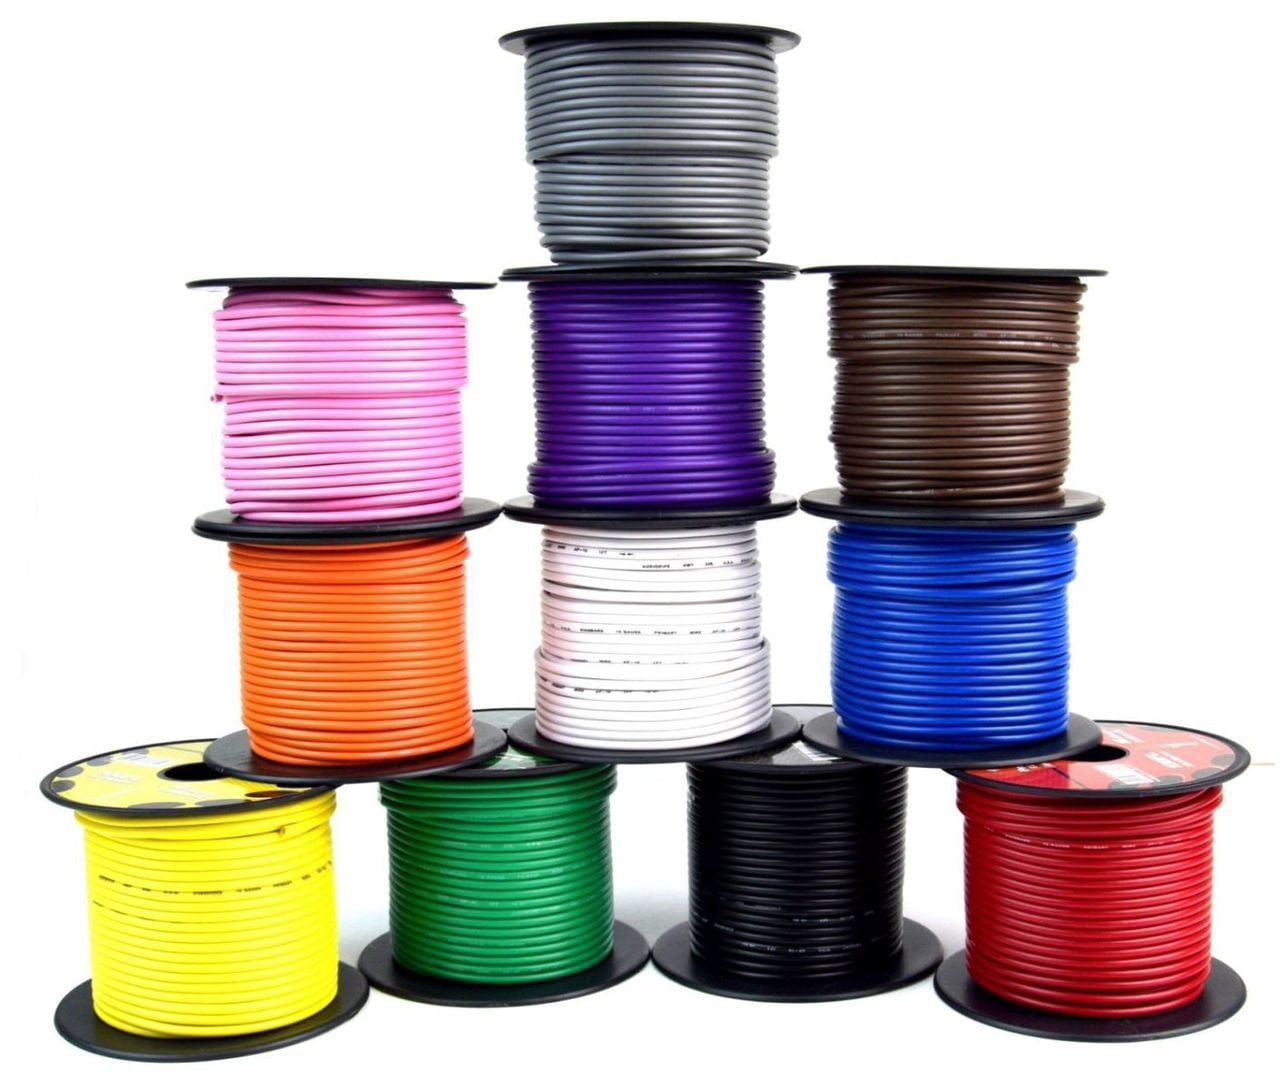 16 GA 100 FT SPOOLS PRIMARY AUTO REMOTE POWER GROUND WIRE CABLE (2 ROLLS)